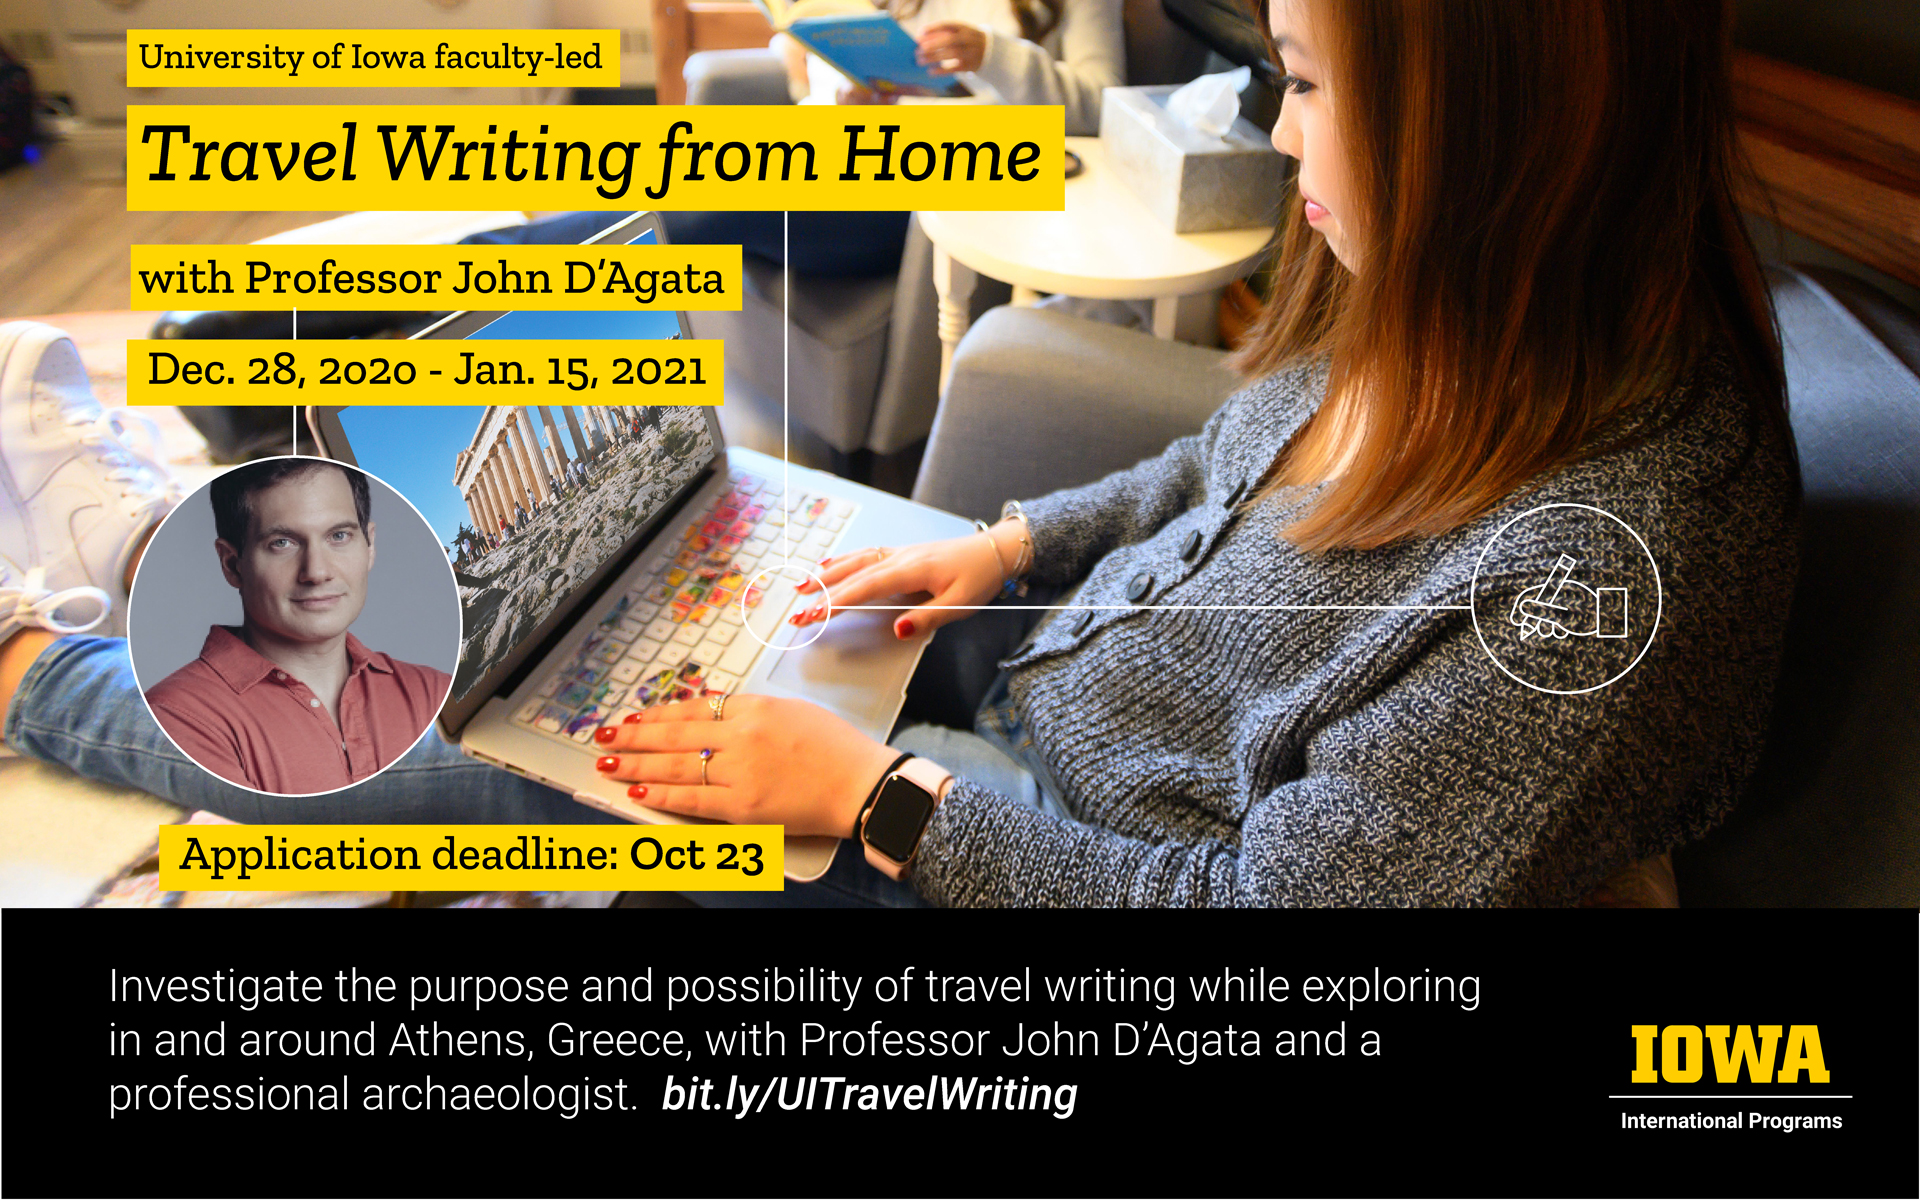 Travel Writing from home